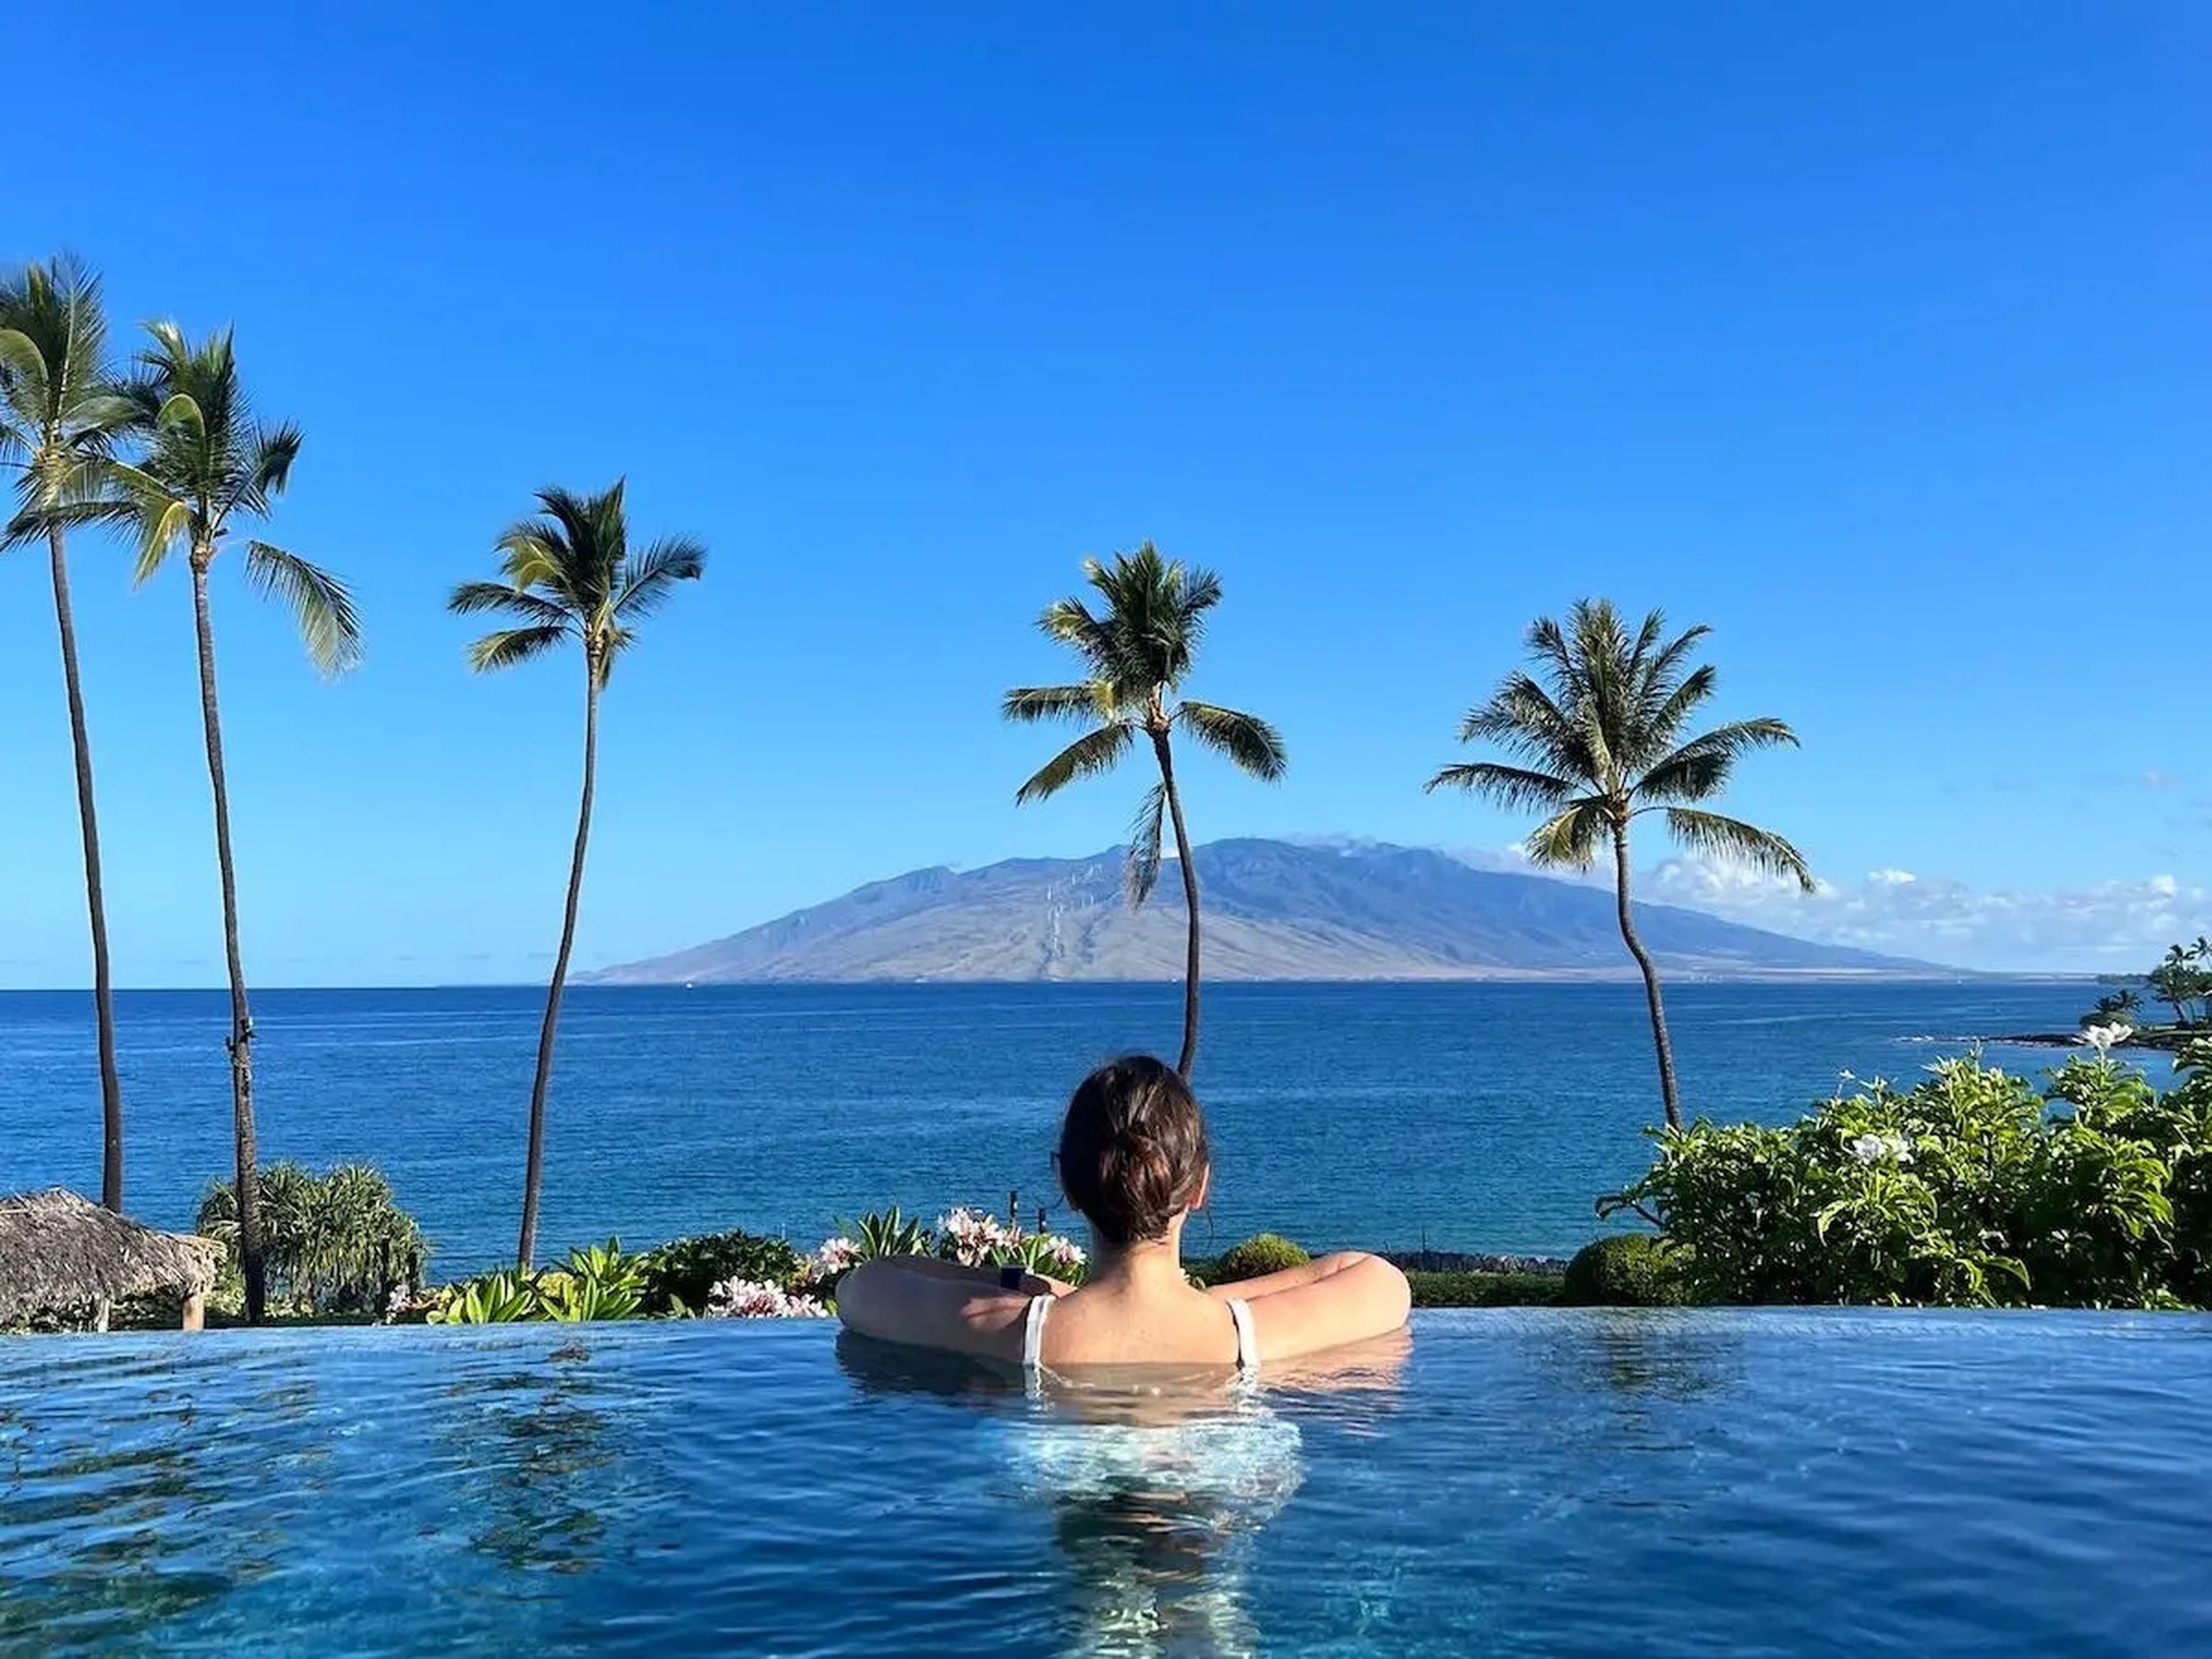 A woman with her back to the camera is pictured resting on the edge of an infinity pool, looking out at the Pacific Ocean and West Maui Mountains.